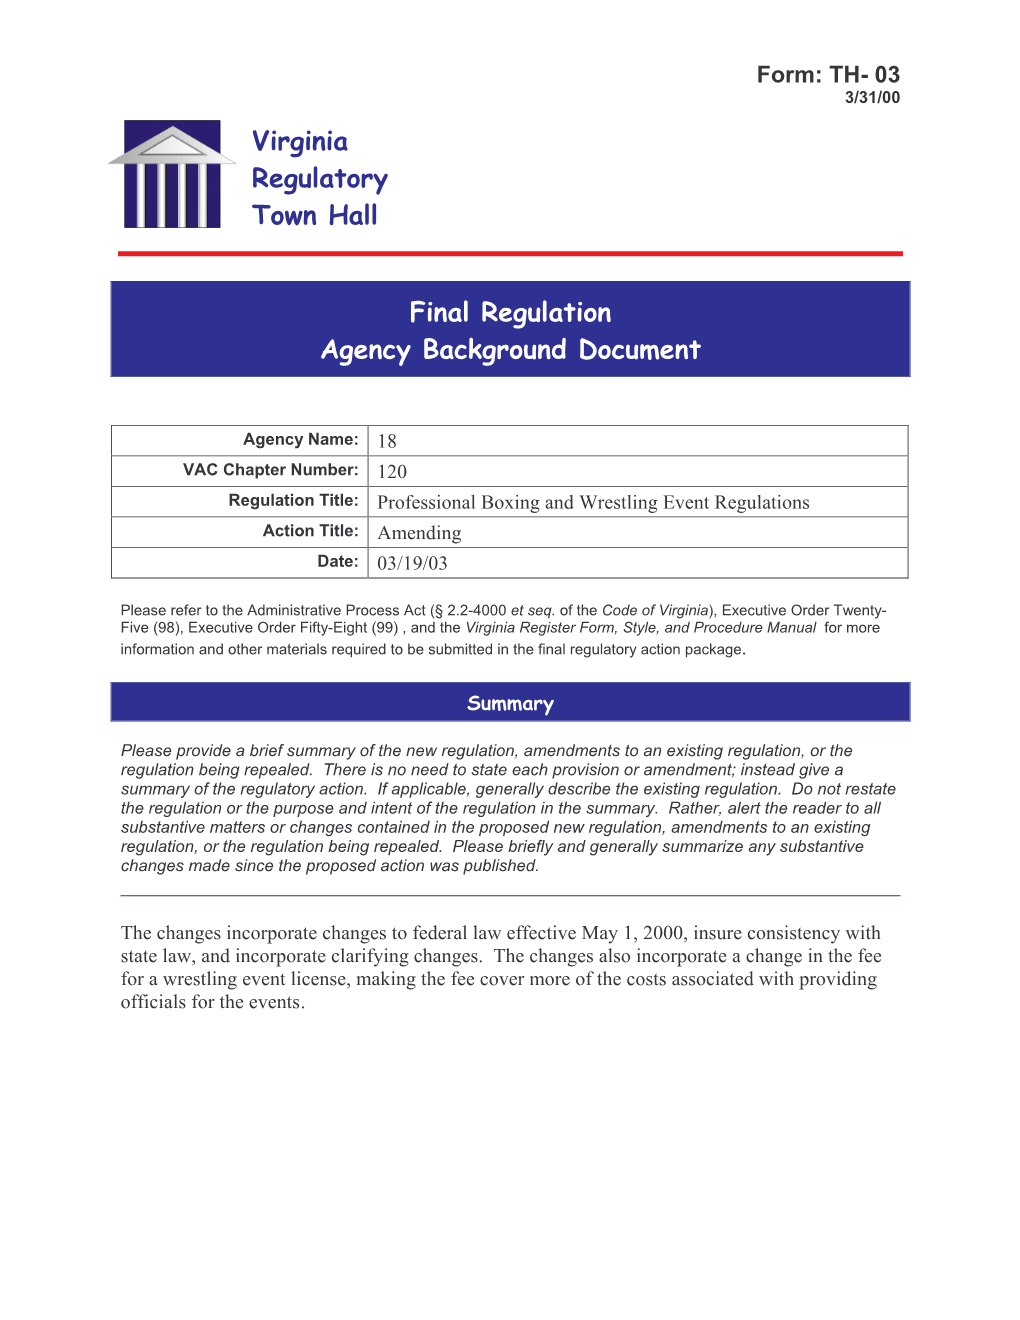 Agency Background Document Form: TH- 03